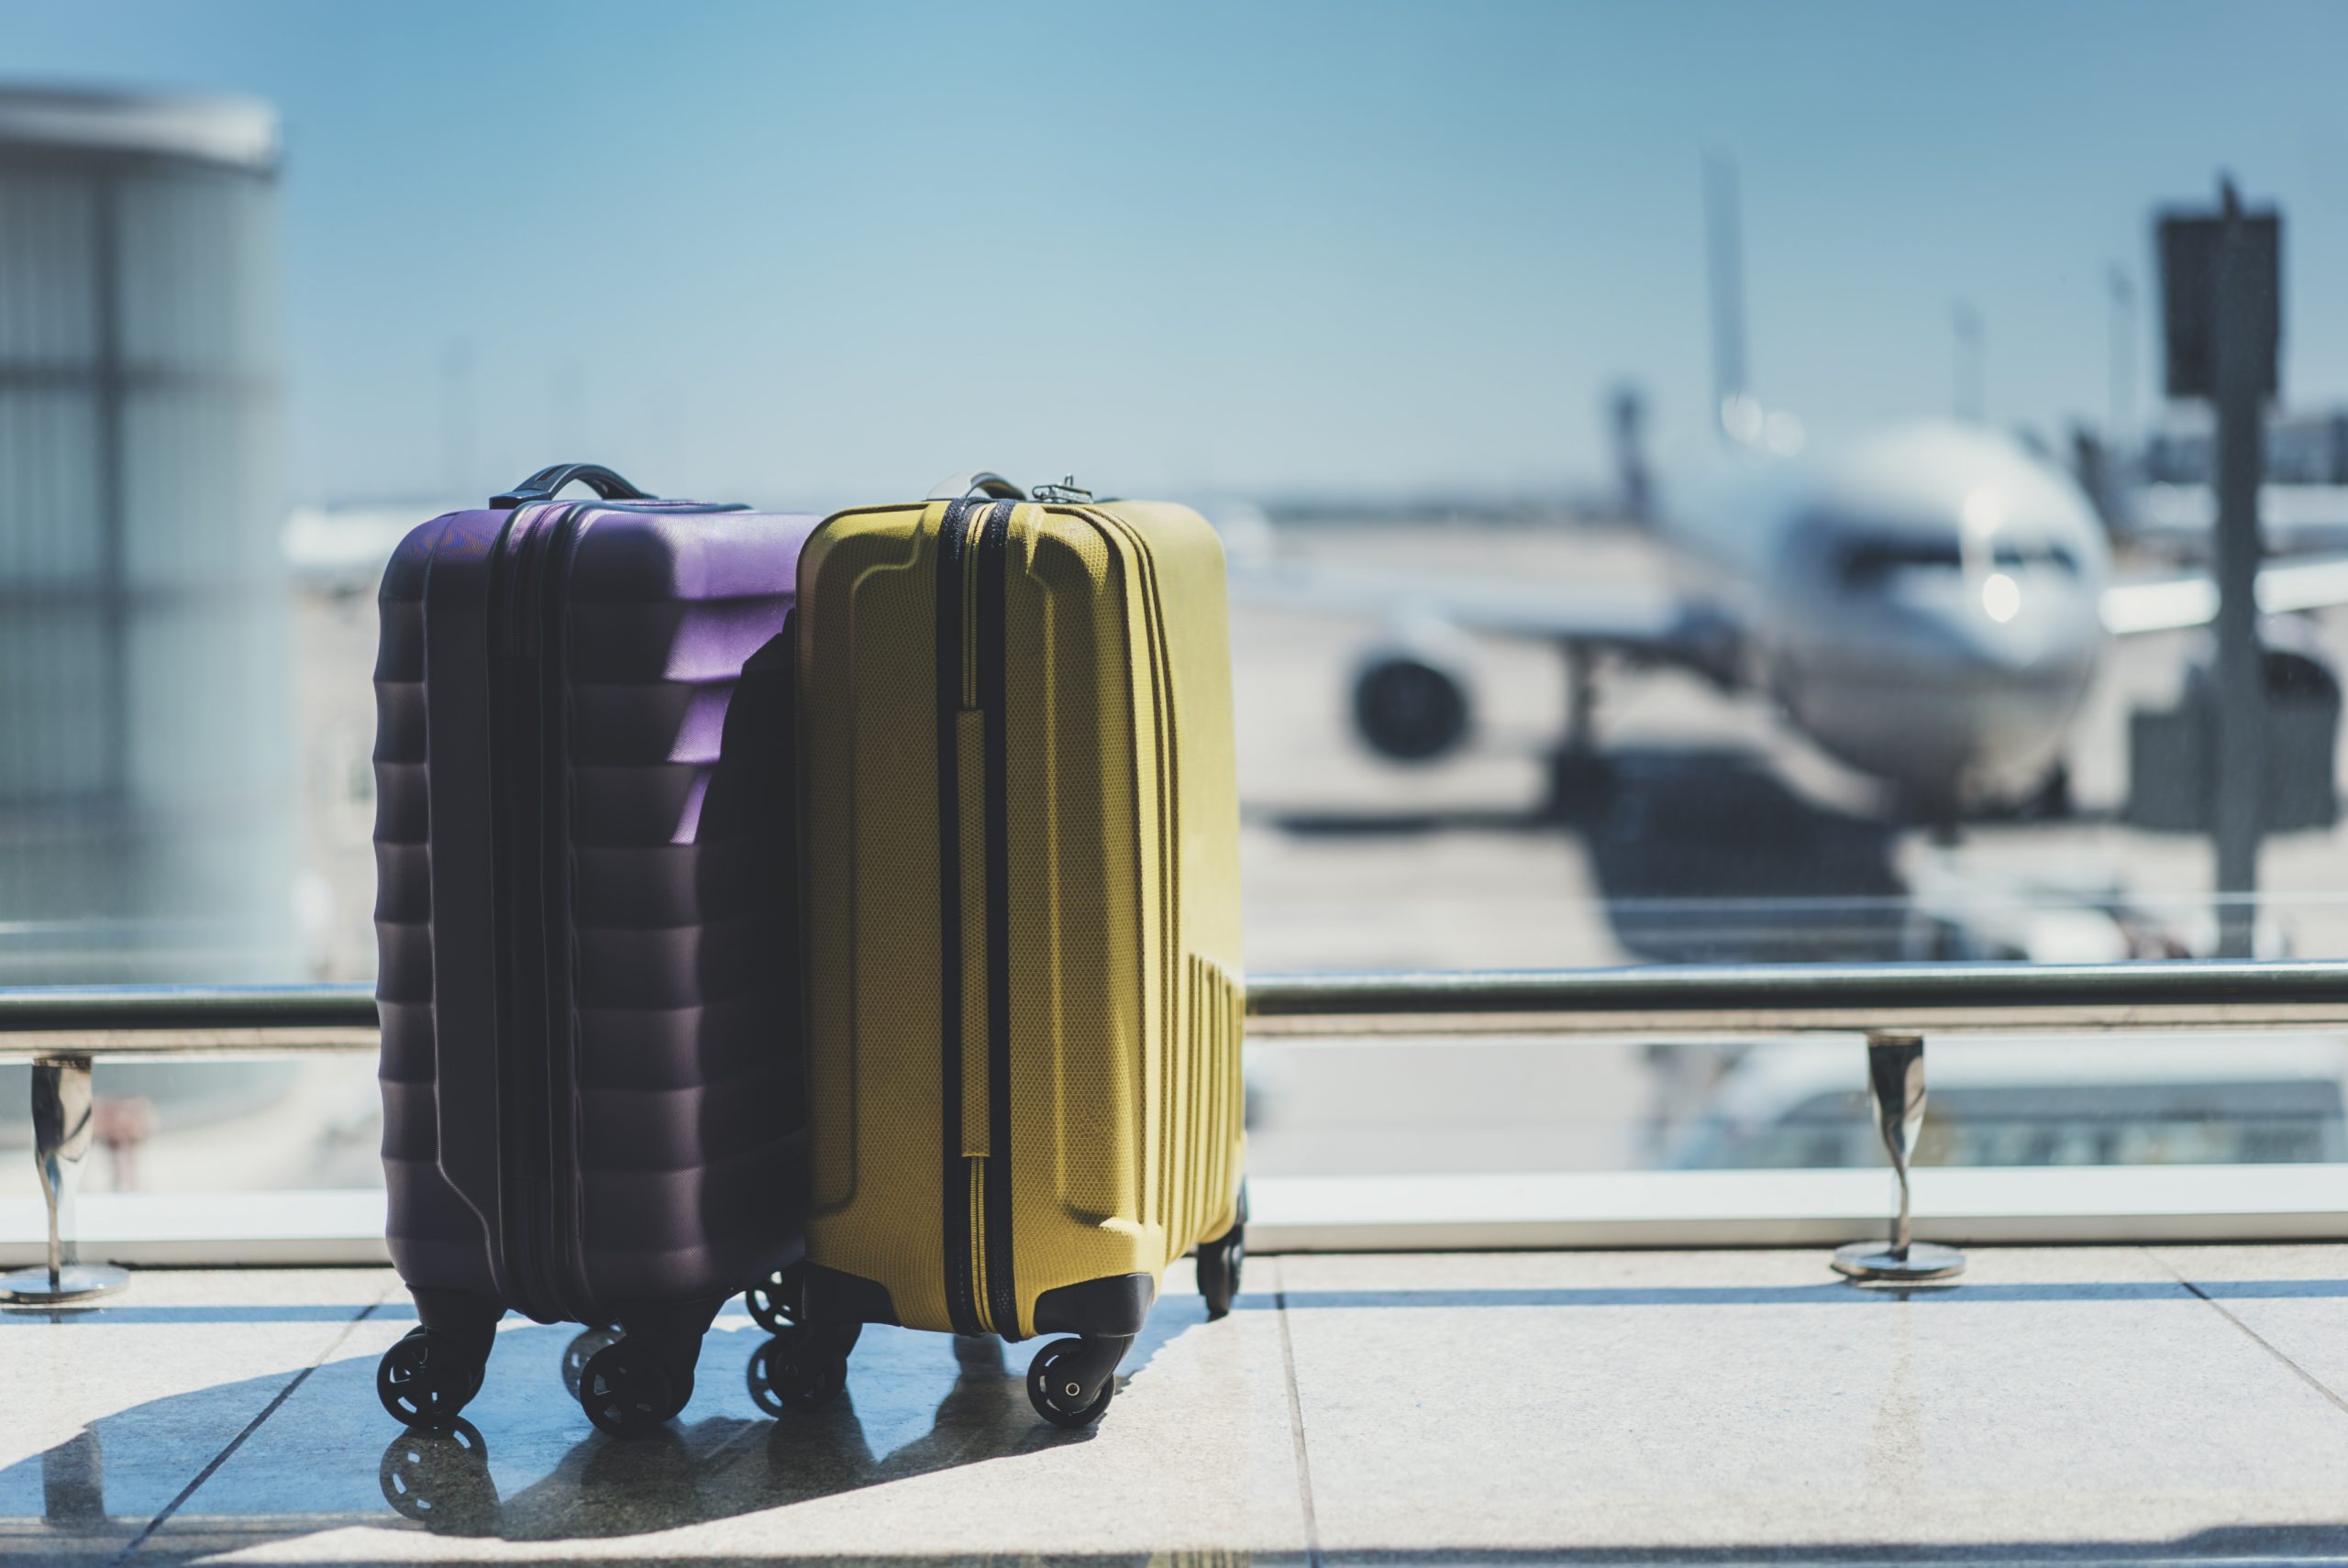 A purple suitcase and a yellow suitcase next to each other at an aiport.